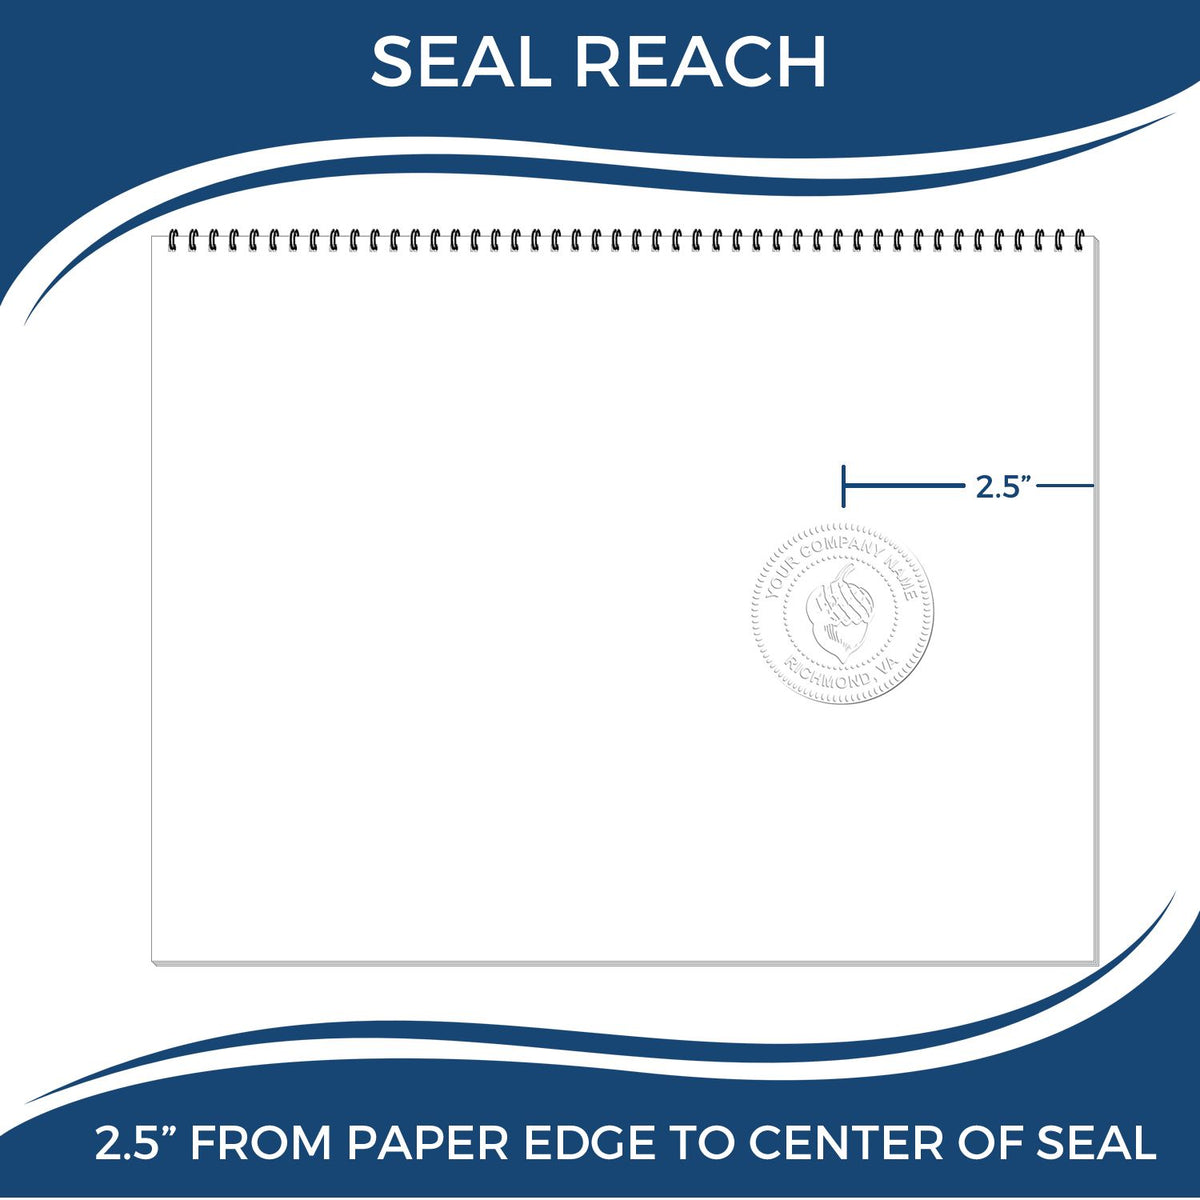 An infographic showing the seal reach which is represented by a ruler and a miniature seal image of the Heavy Duty Cast Iron New Jersey Engineer Seal Embosser